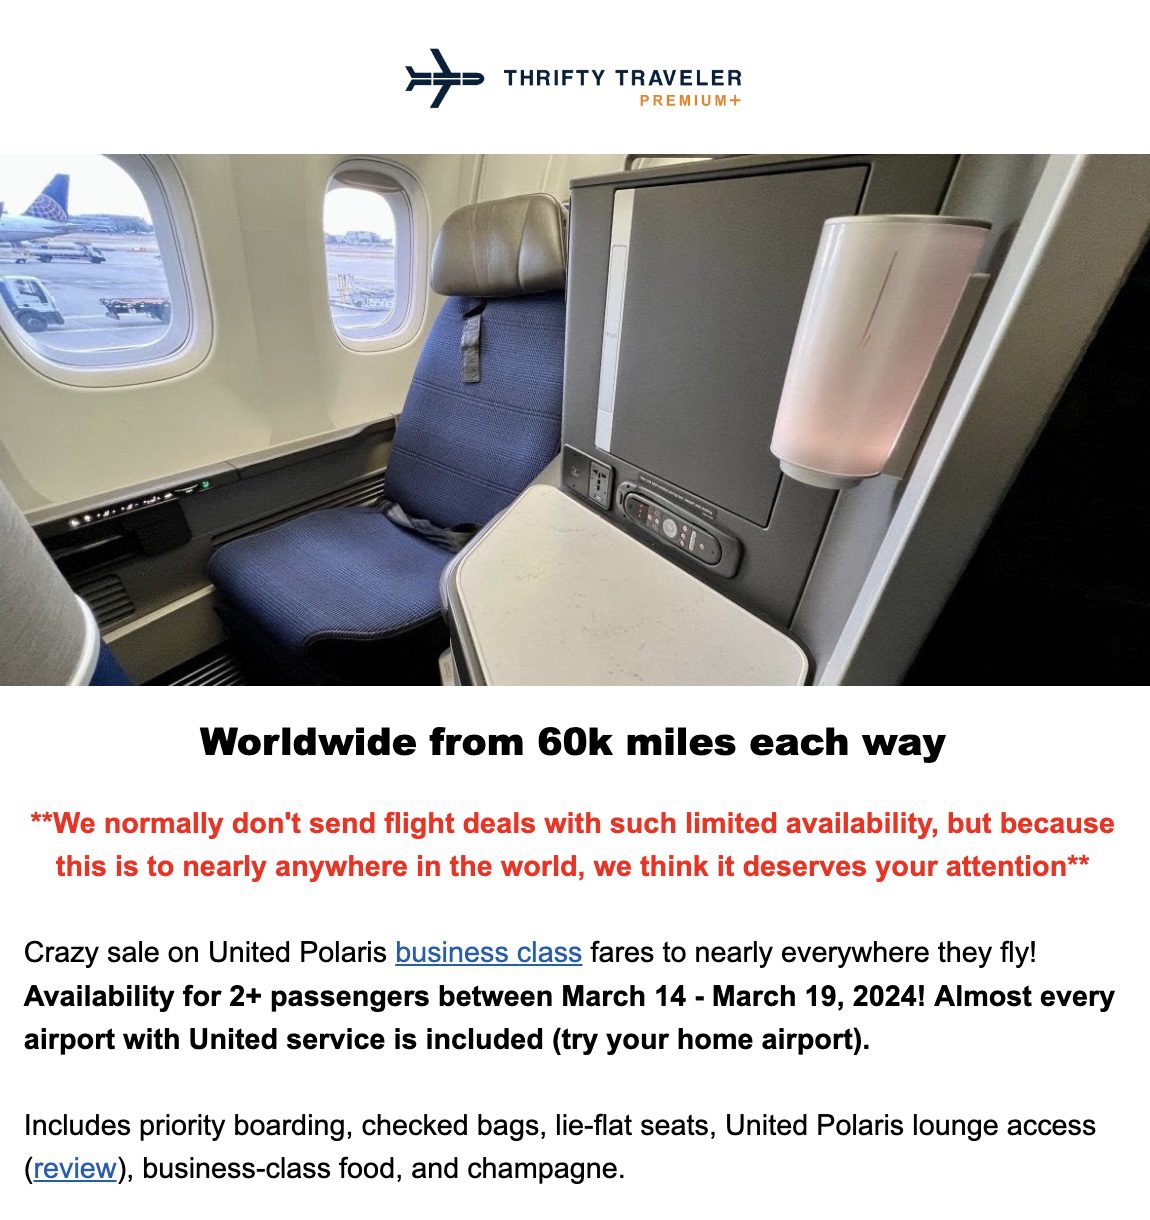 United Miles worldwide sale in business class